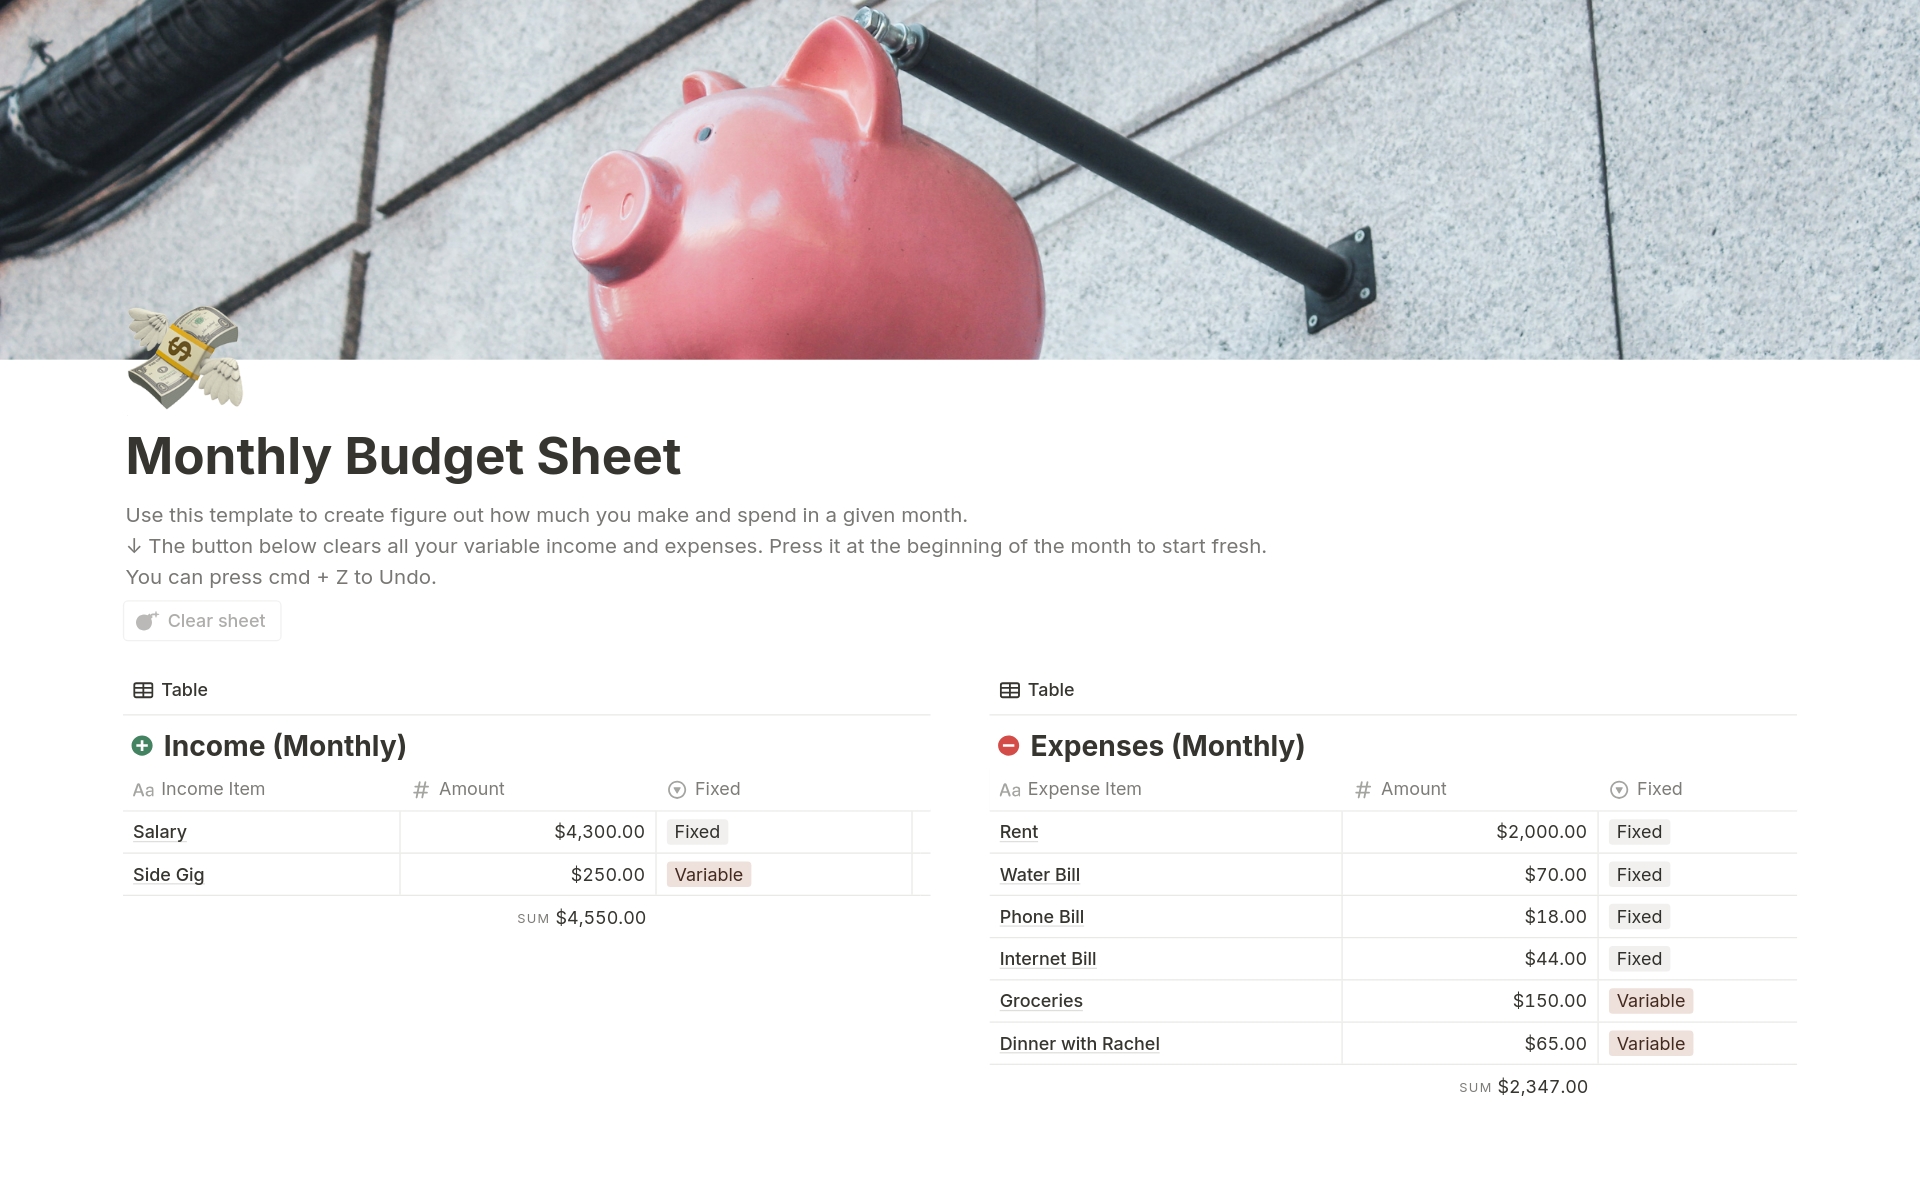 Manage your finances with precision by tracking and categorizing monthly income and expenses.